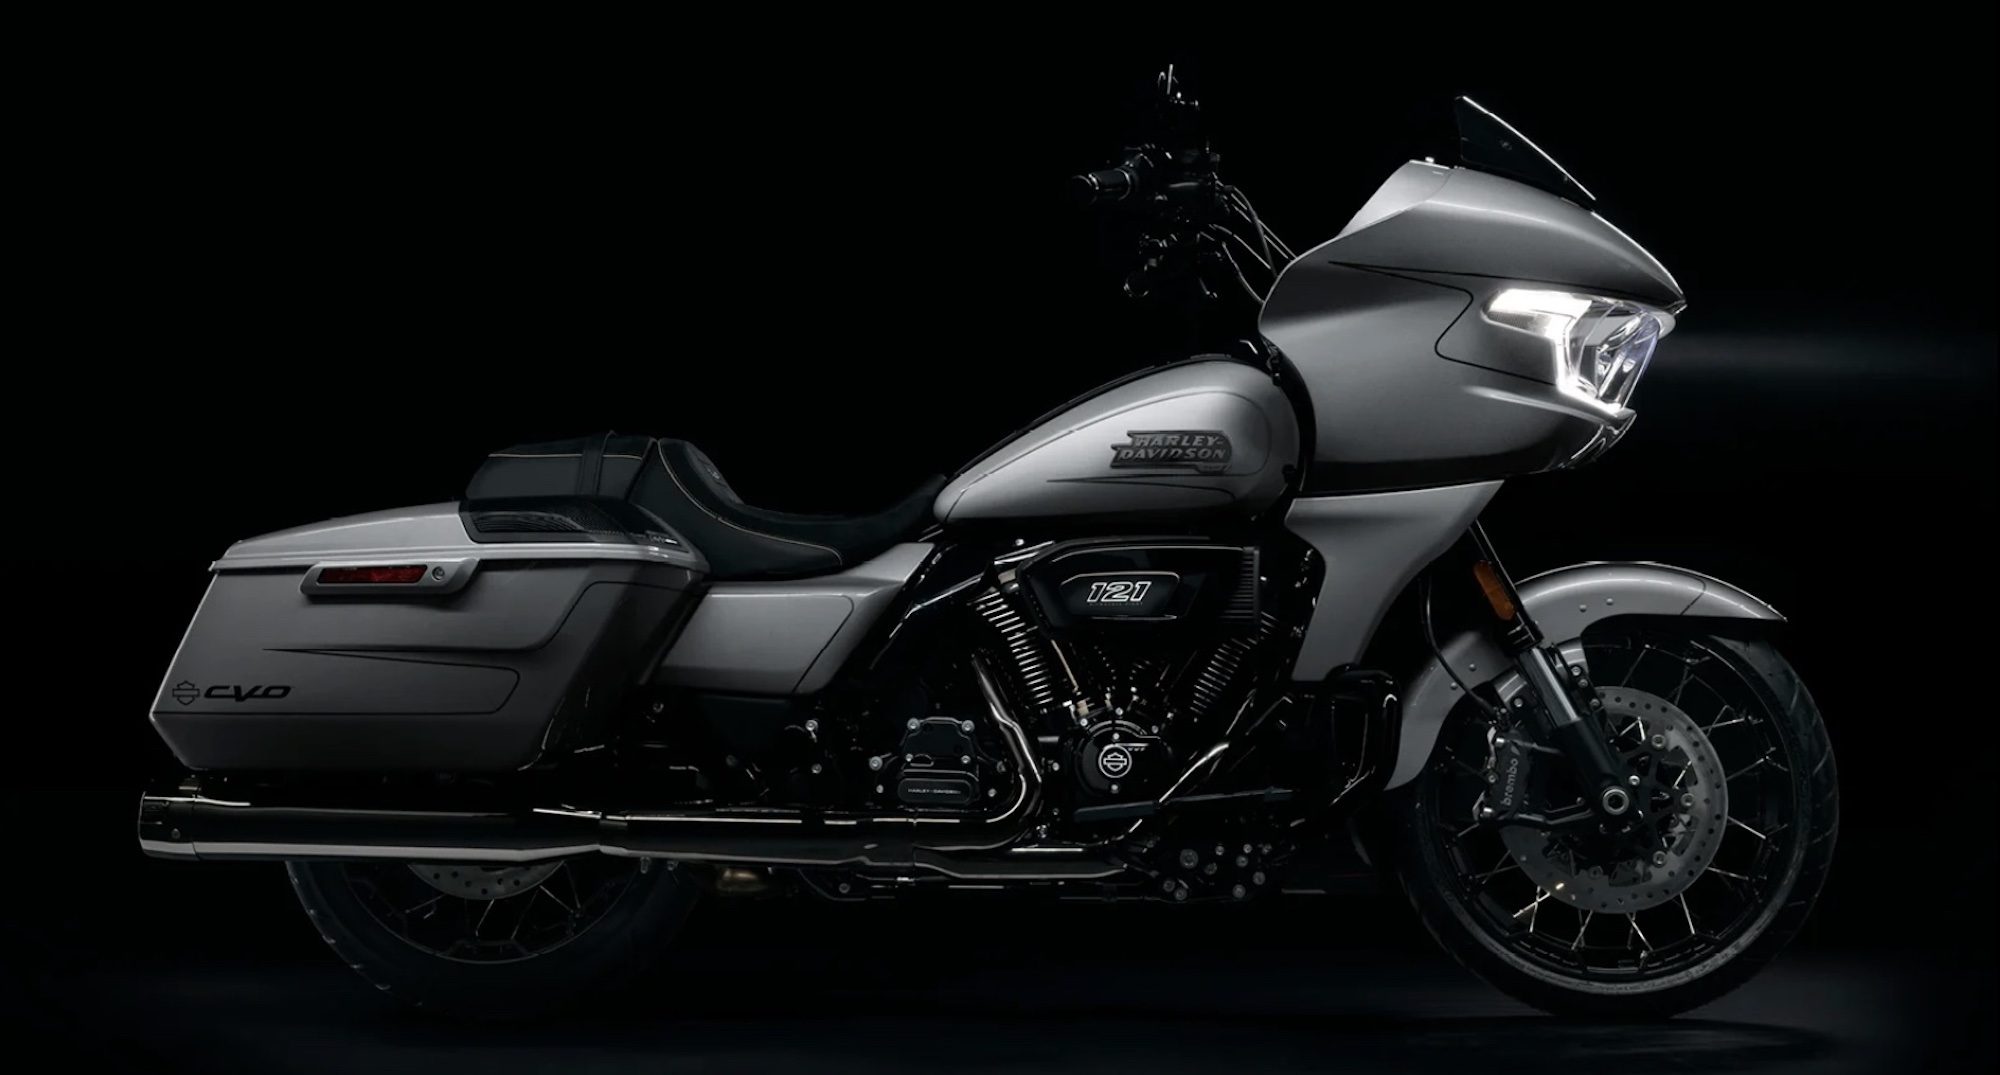 A view of Harley's 2023 CVO Road Glide. Media sourced from Harley-Davidson.